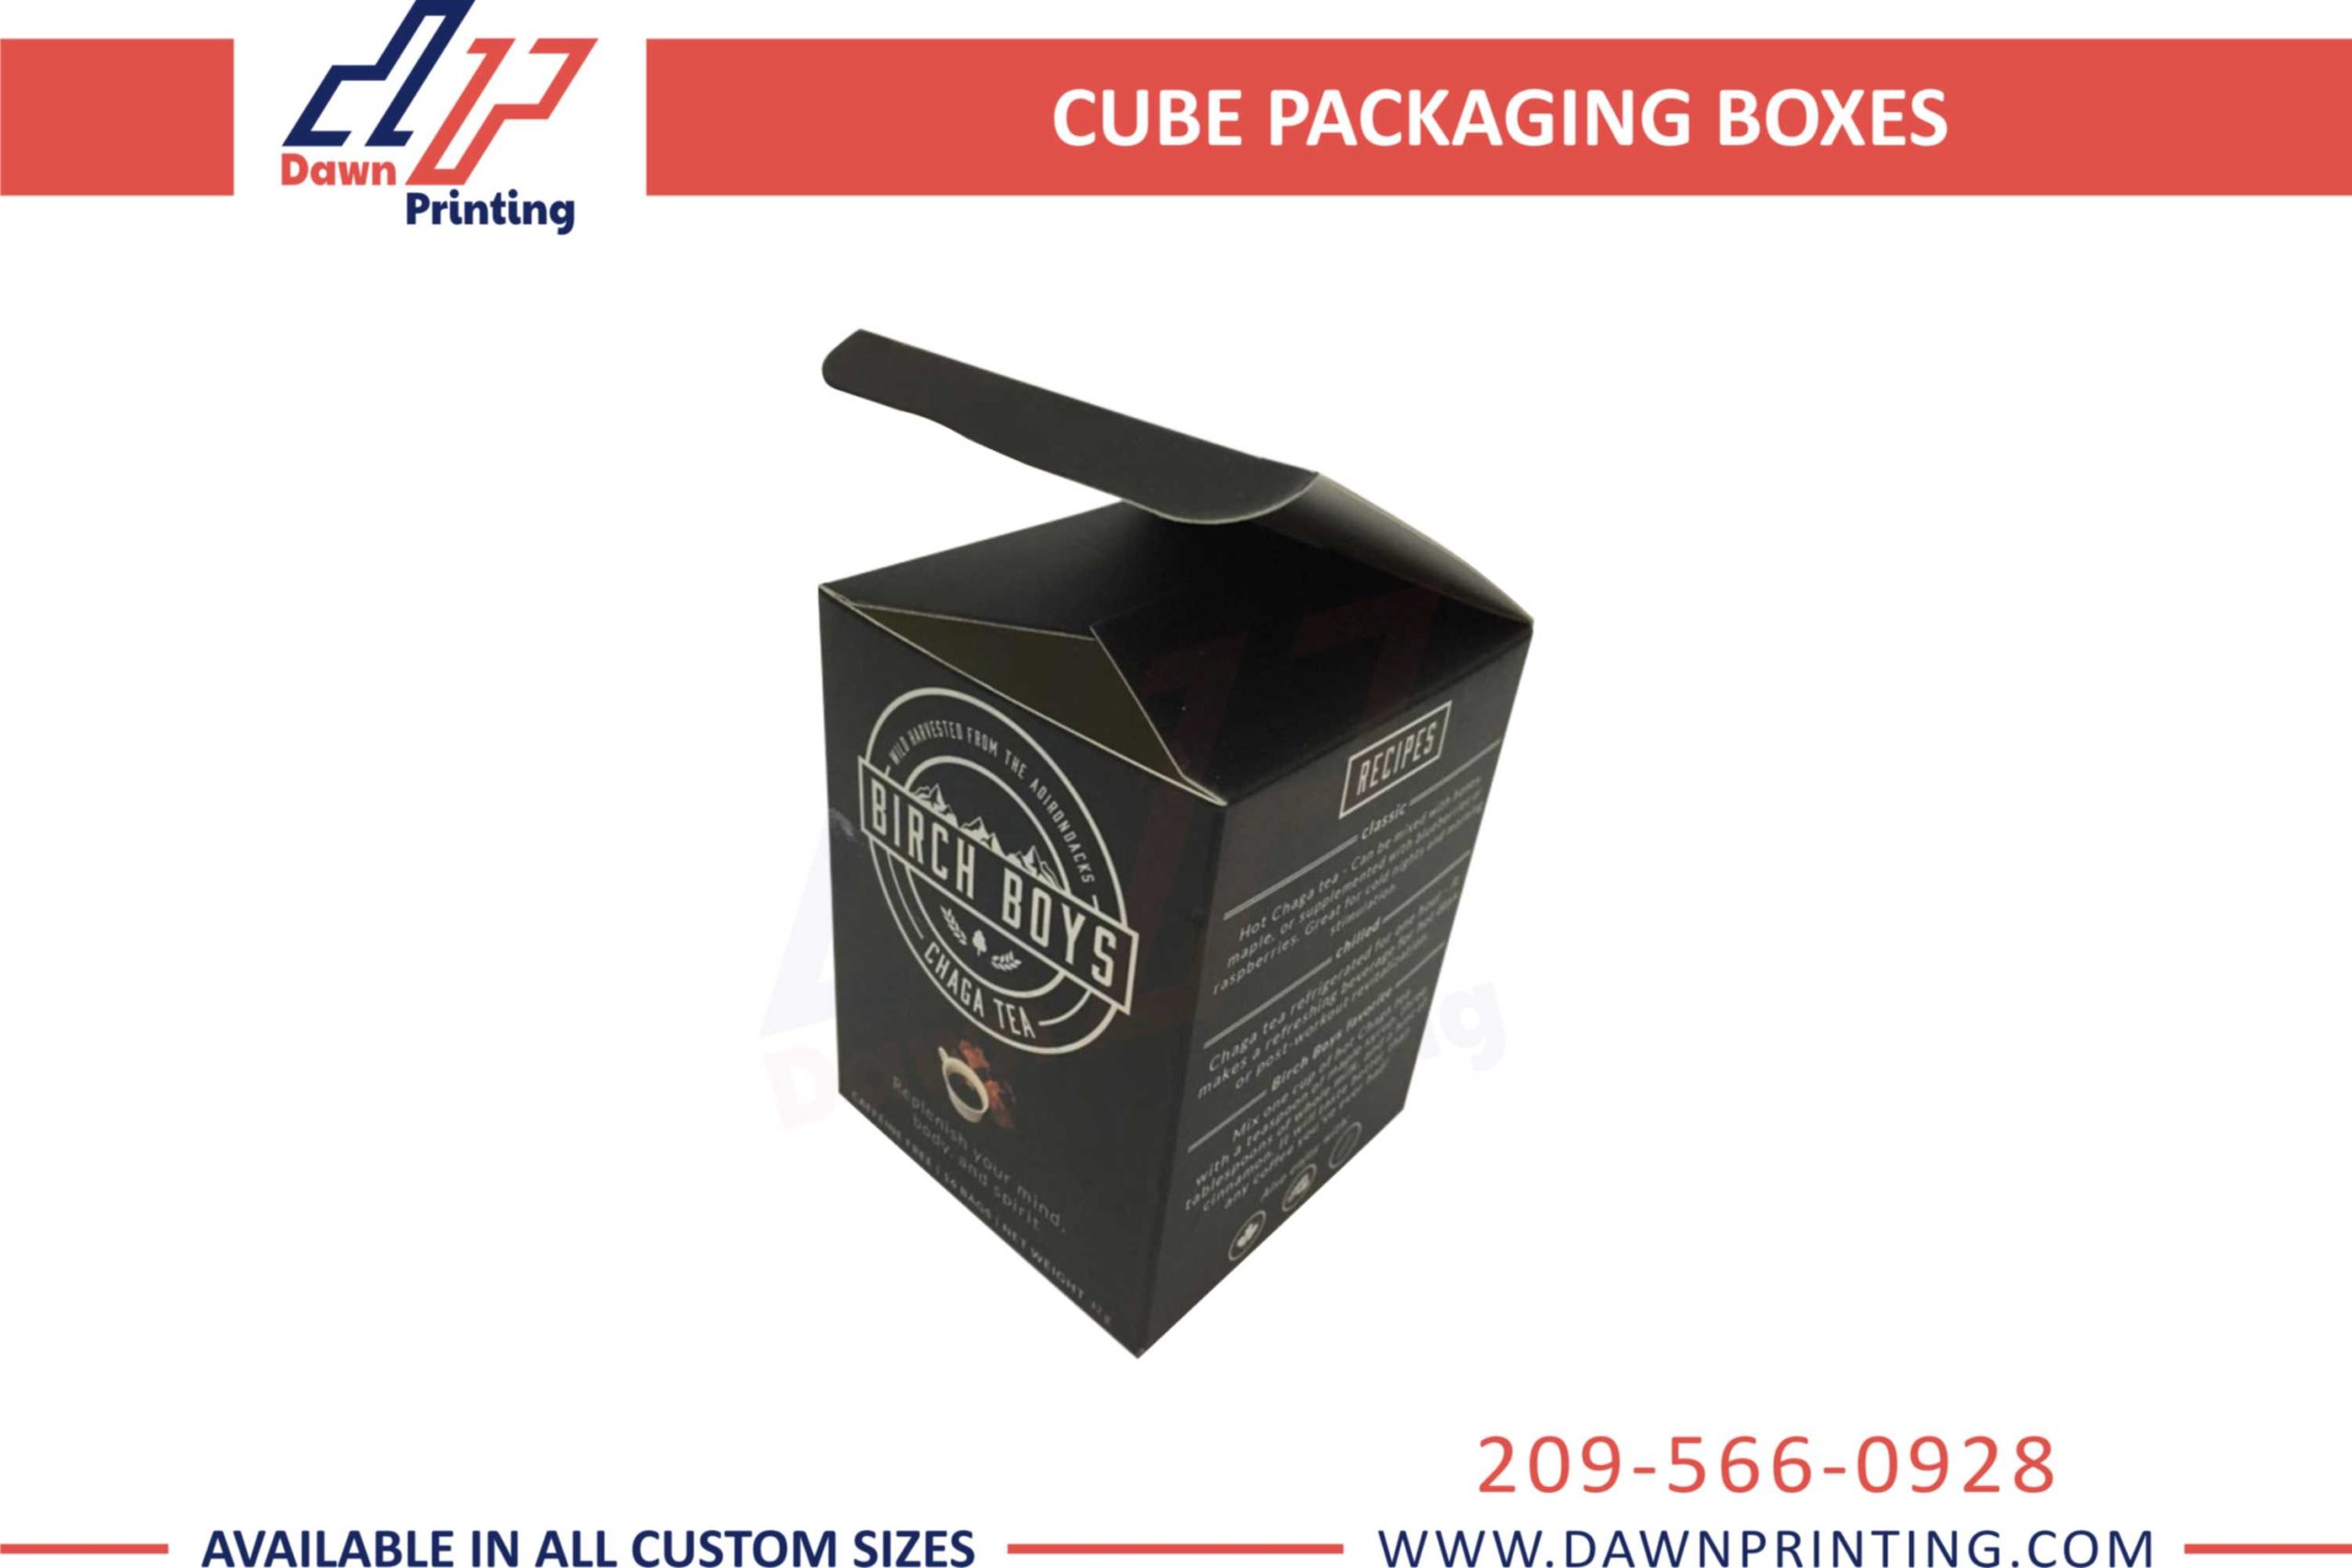 Cube Packaging Boxes with Logo - Dawn Printing